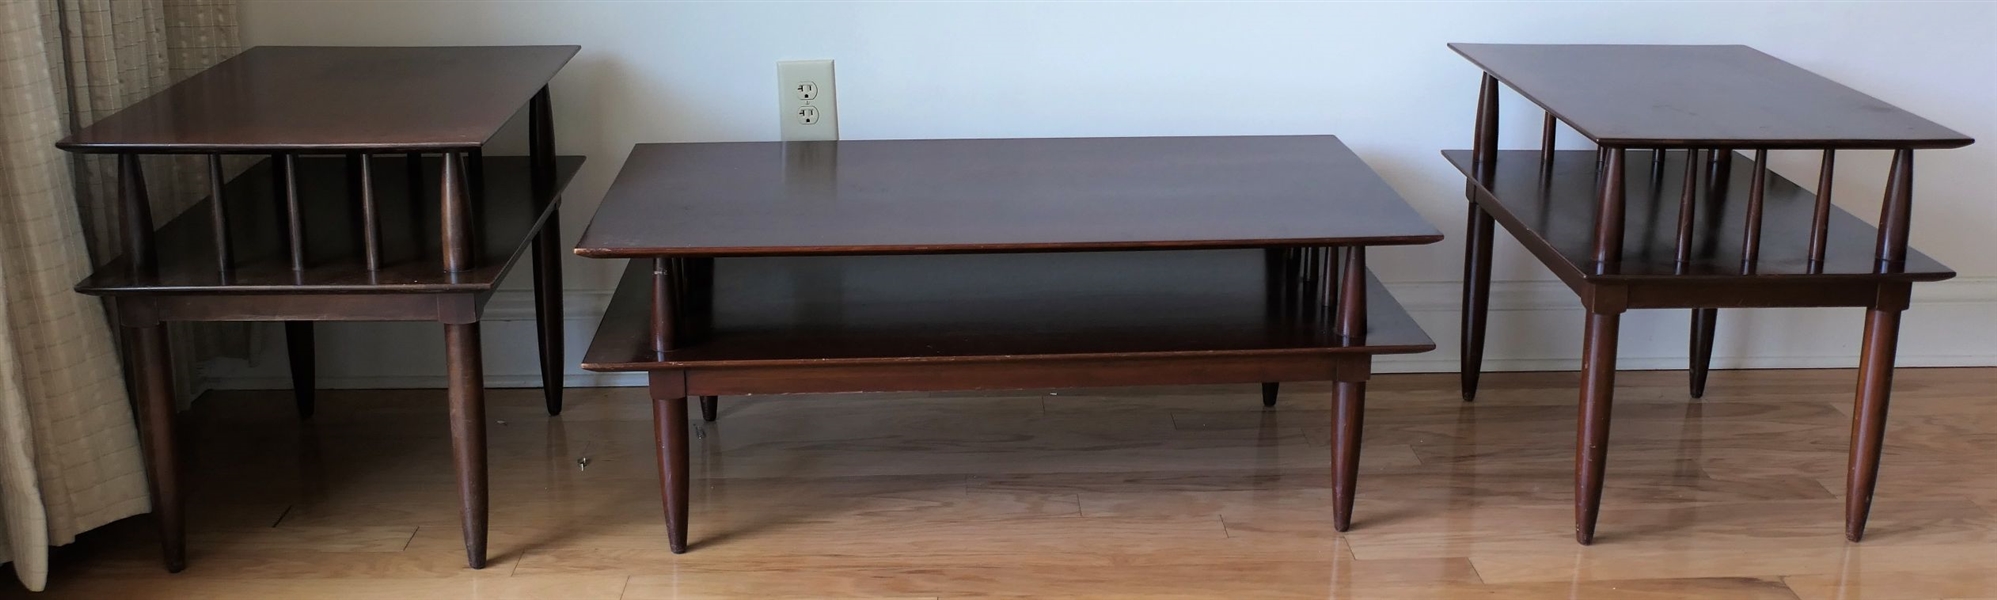 Willett Cherry Coffee Table and End Tables